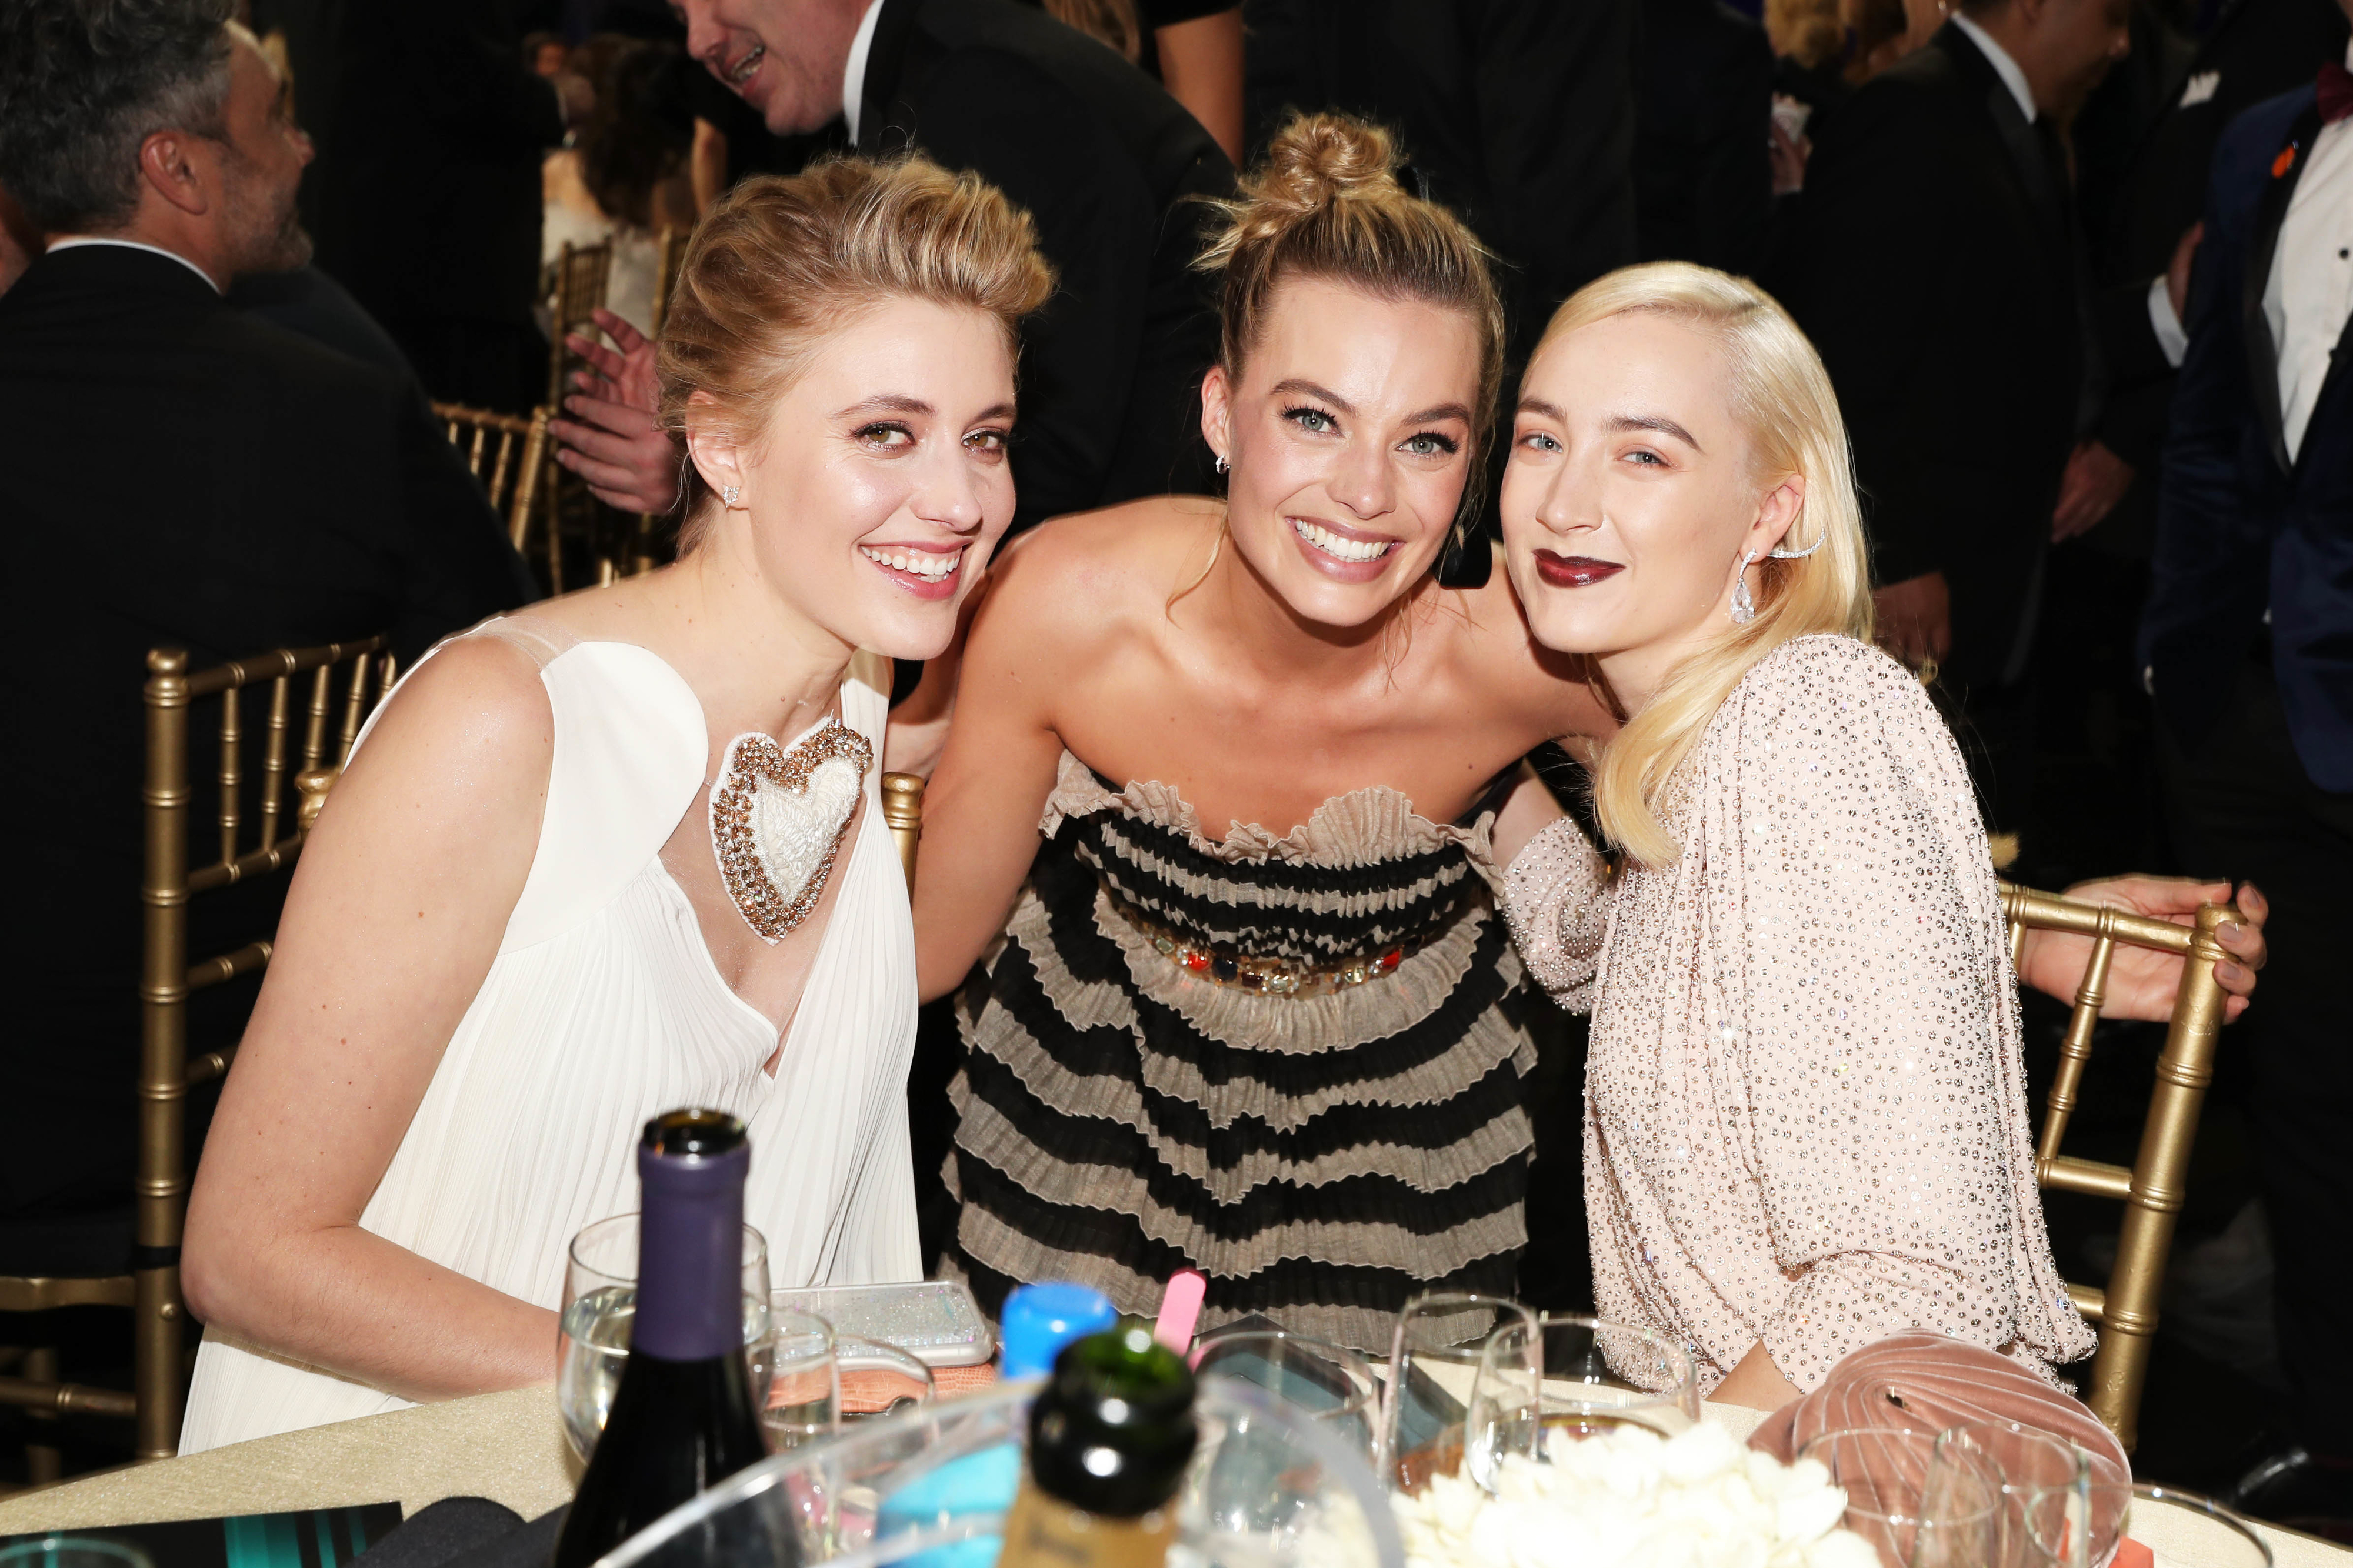 Greta, Margot, and Saoirse smile for a photo as they sit at a dinner table during an awards show